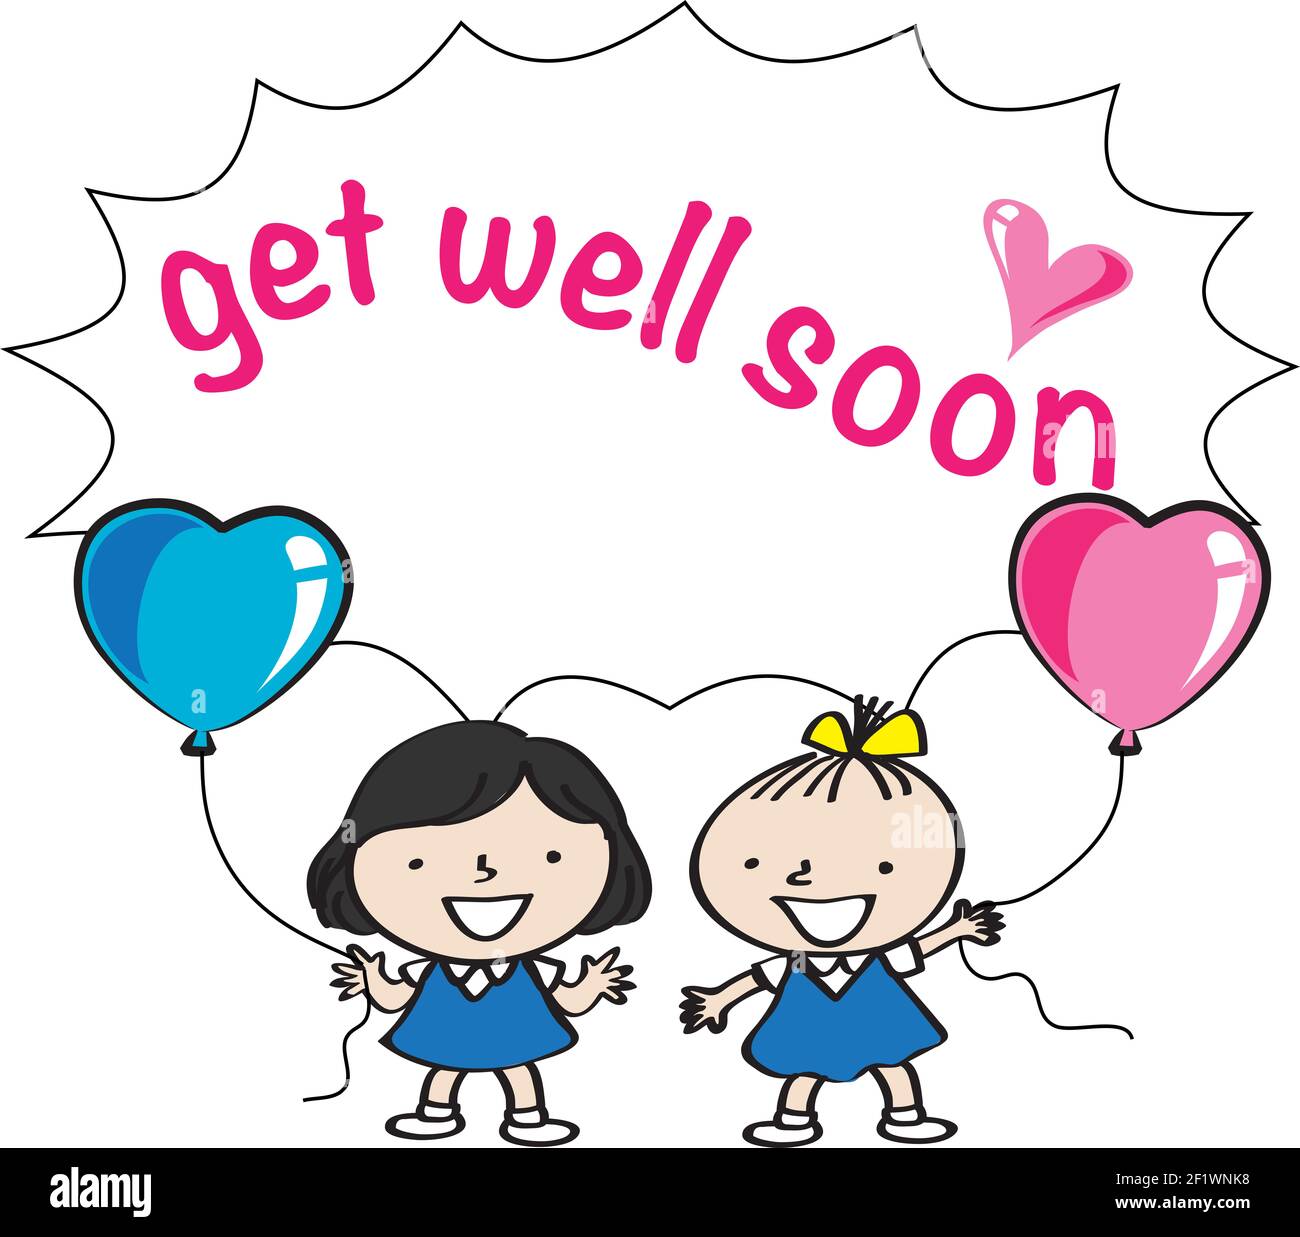 get well soon Stock Photo